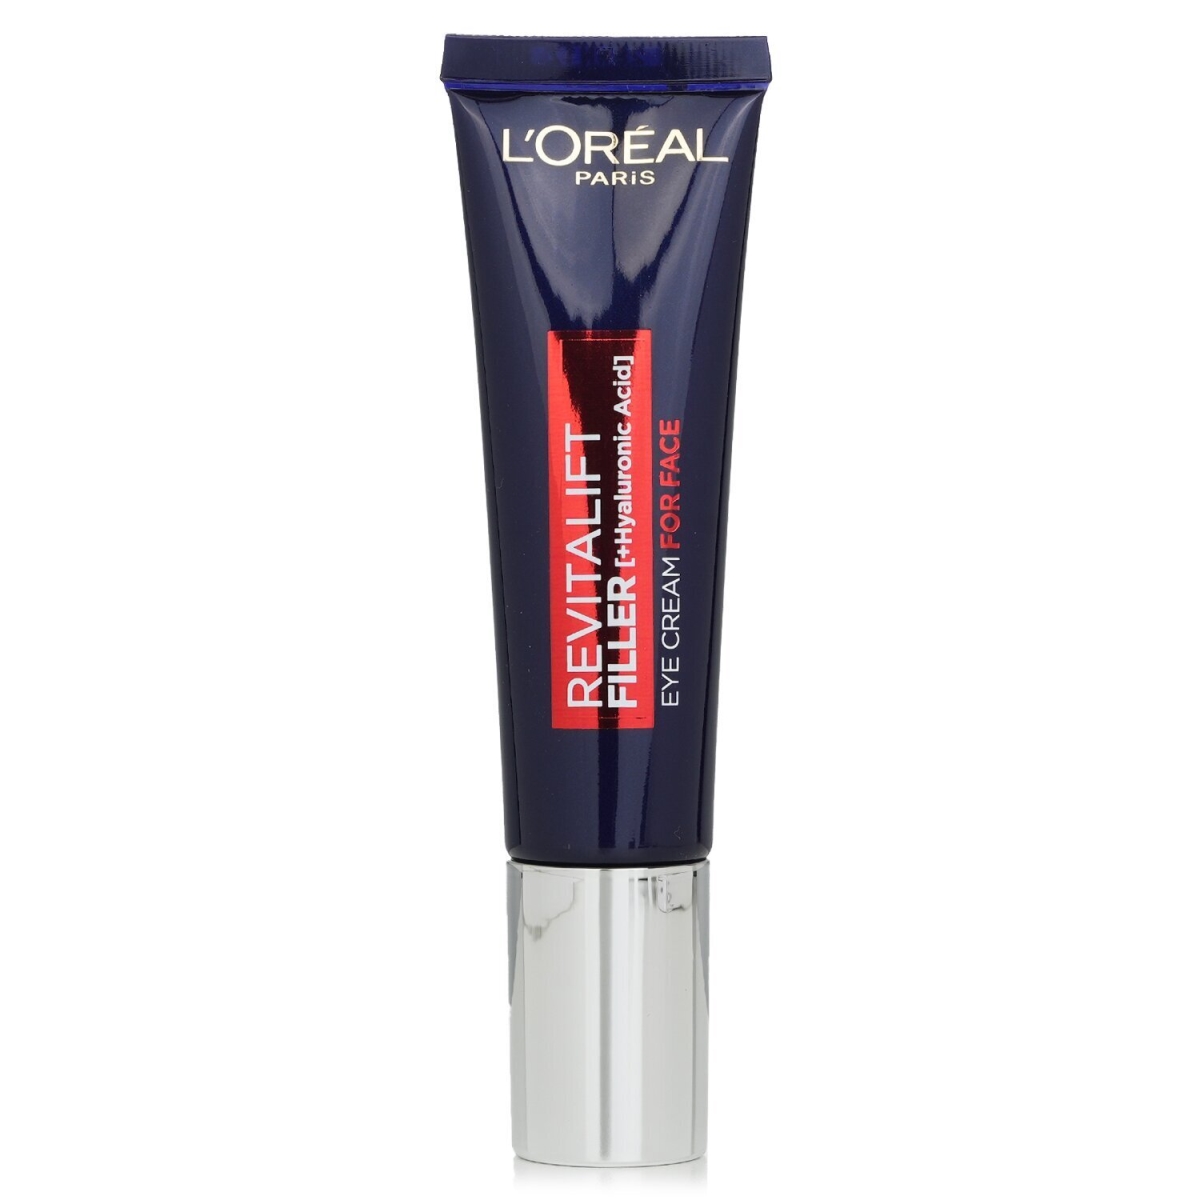 Picture of Loreal 300845 30 ml Revitalift Filler Eye Cream with Hyaluronic Acid for Face